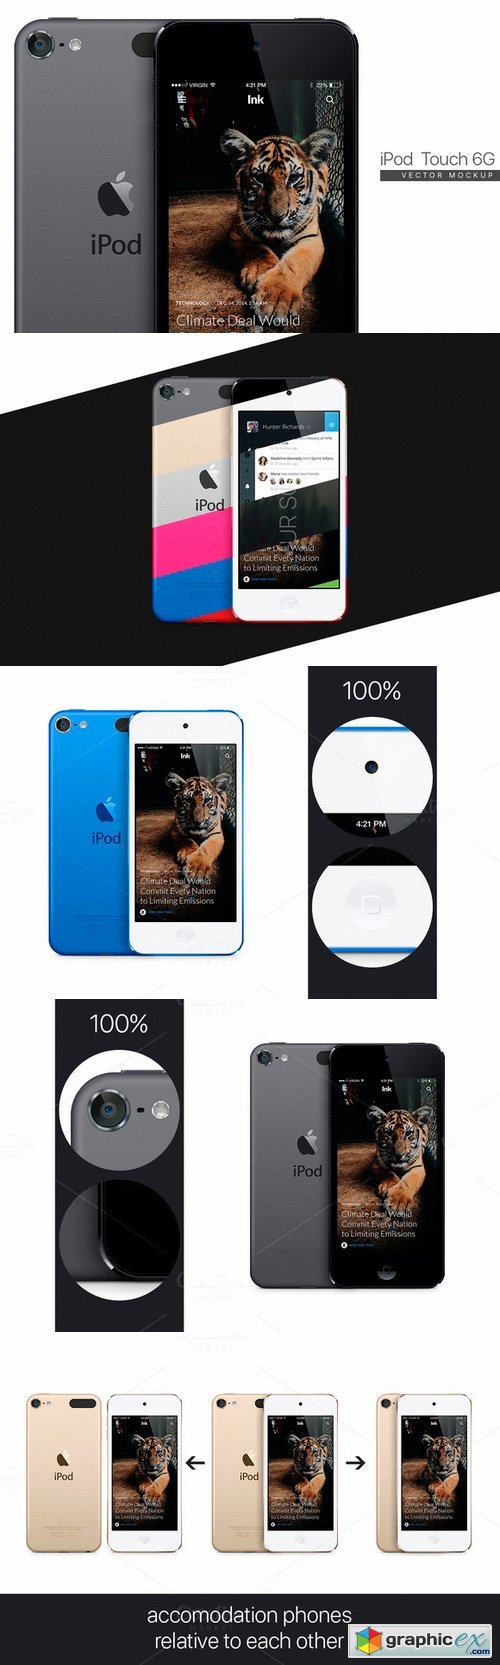 iPod Touch 6G (2015) vector MockUp